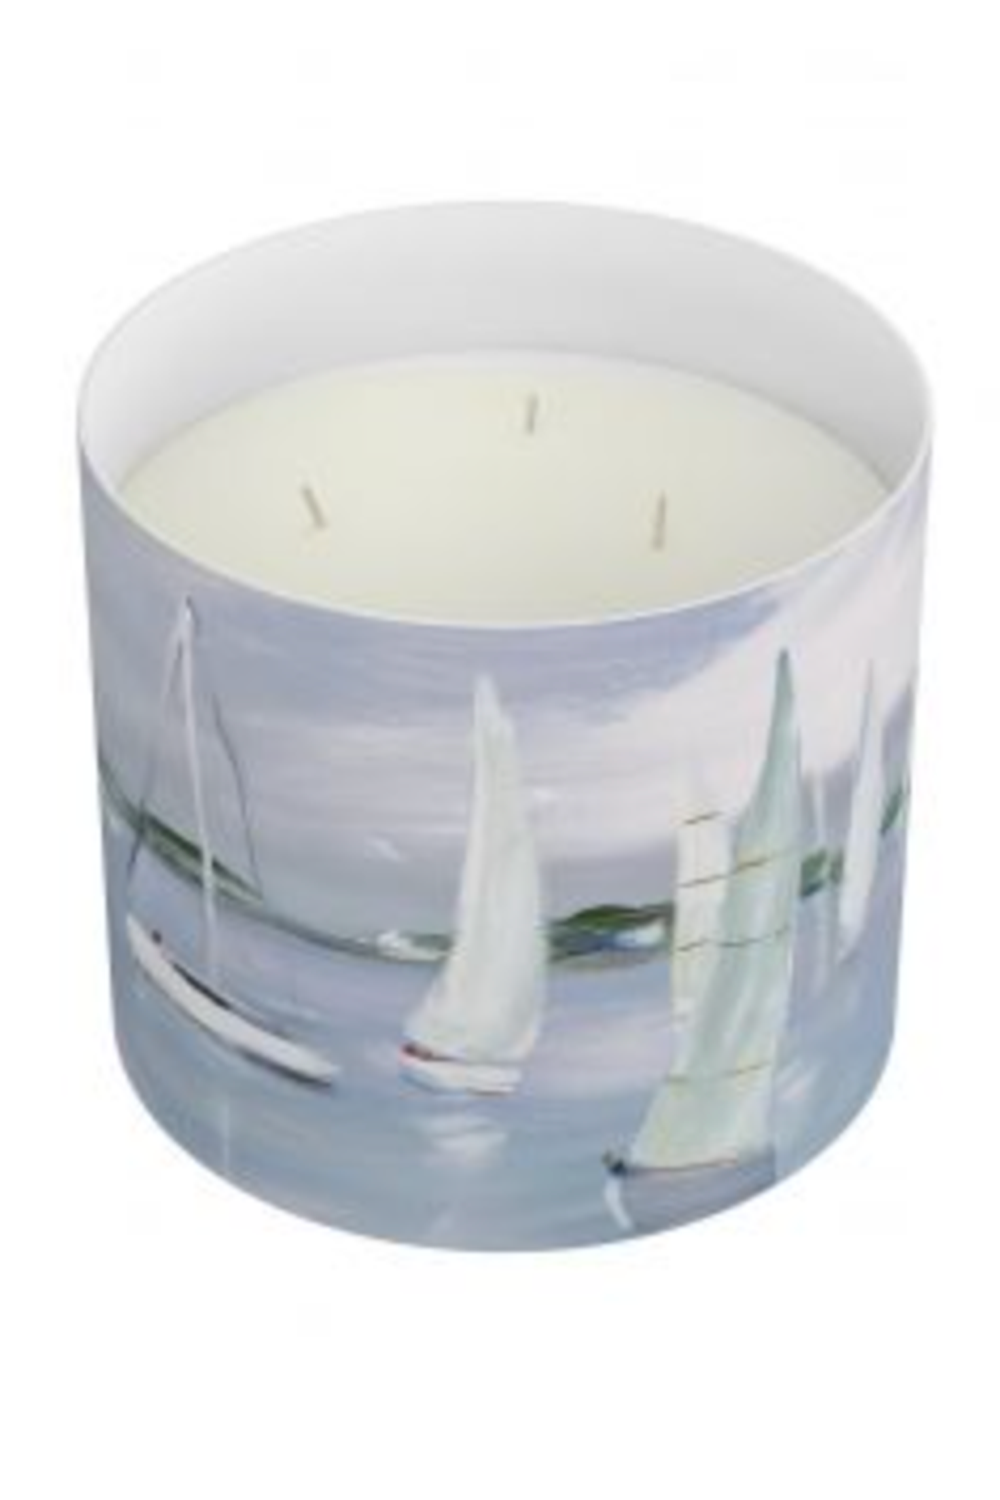 Kim Hovell + Annapolis Candle - 3 Wick Sunday Sail